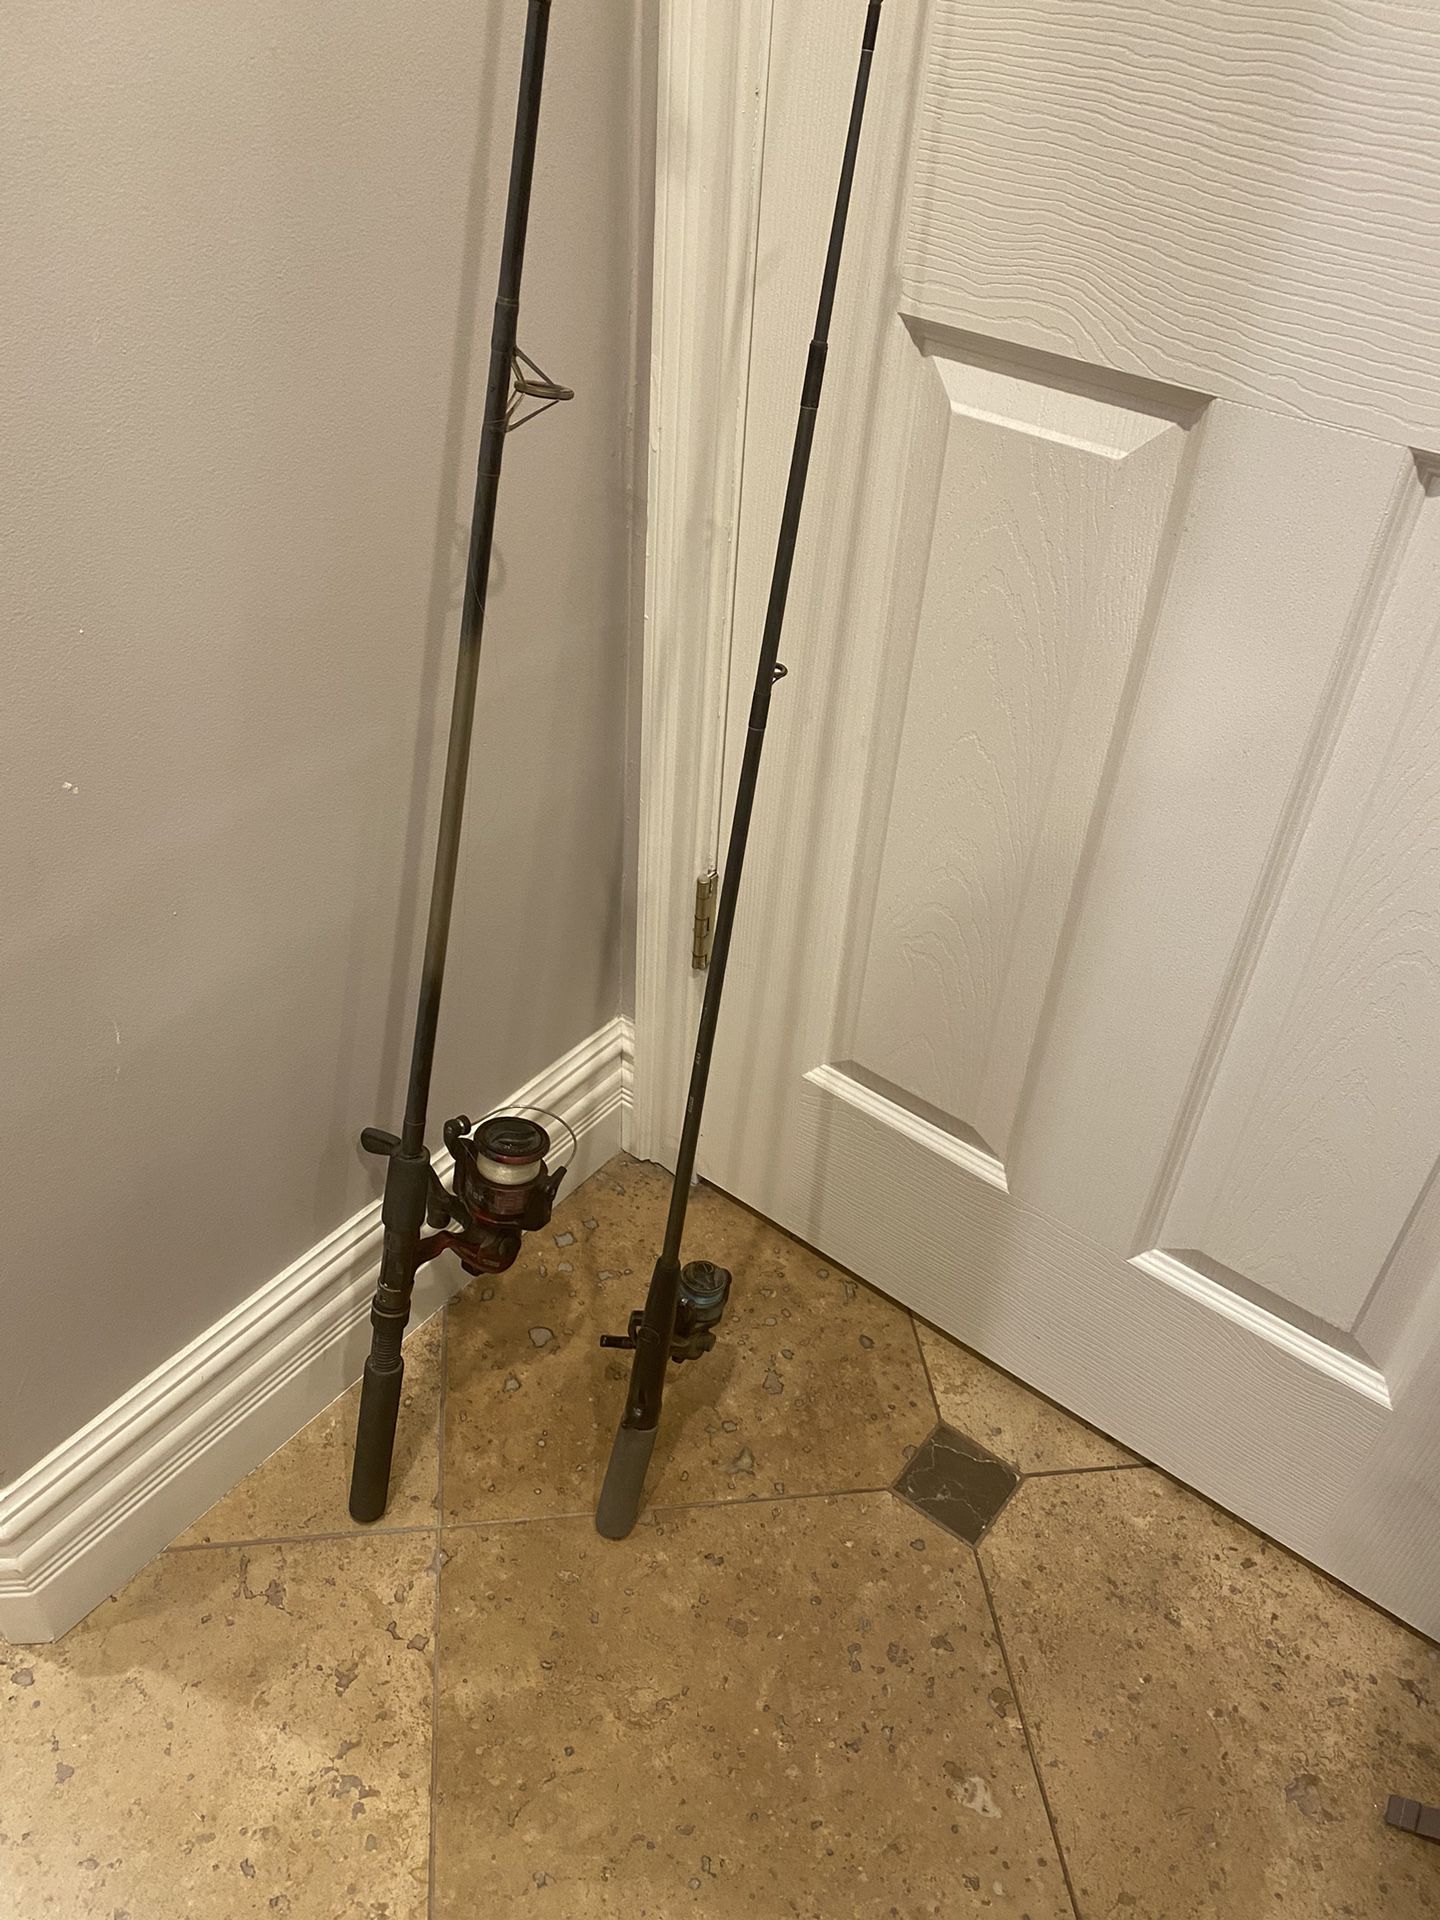 2 Fishing Pole Set Ups Rod And Reel Both with Line 